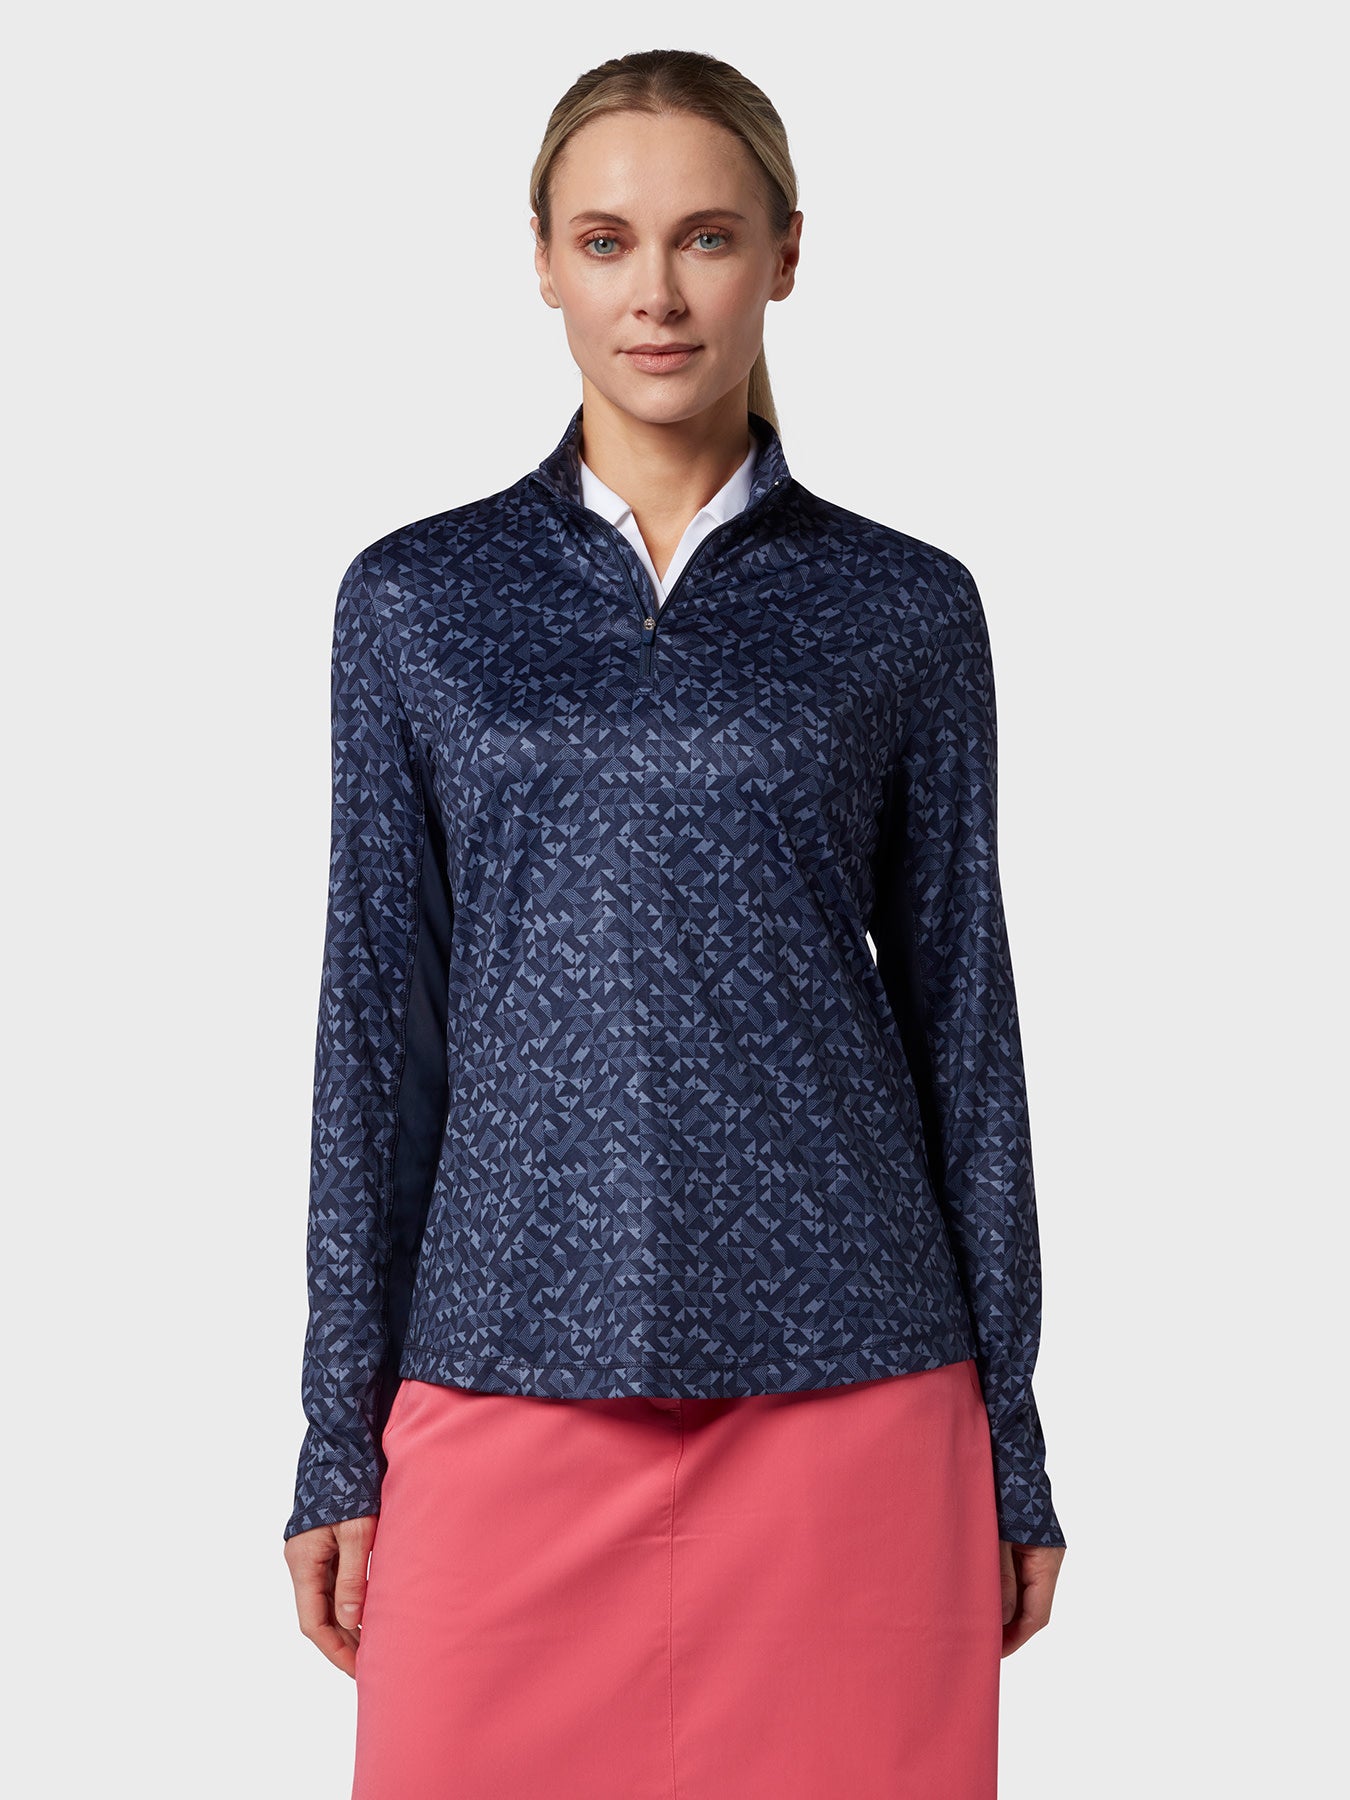 View Shape Shifter Geo Printed Womens Base Layer In Peacoat information